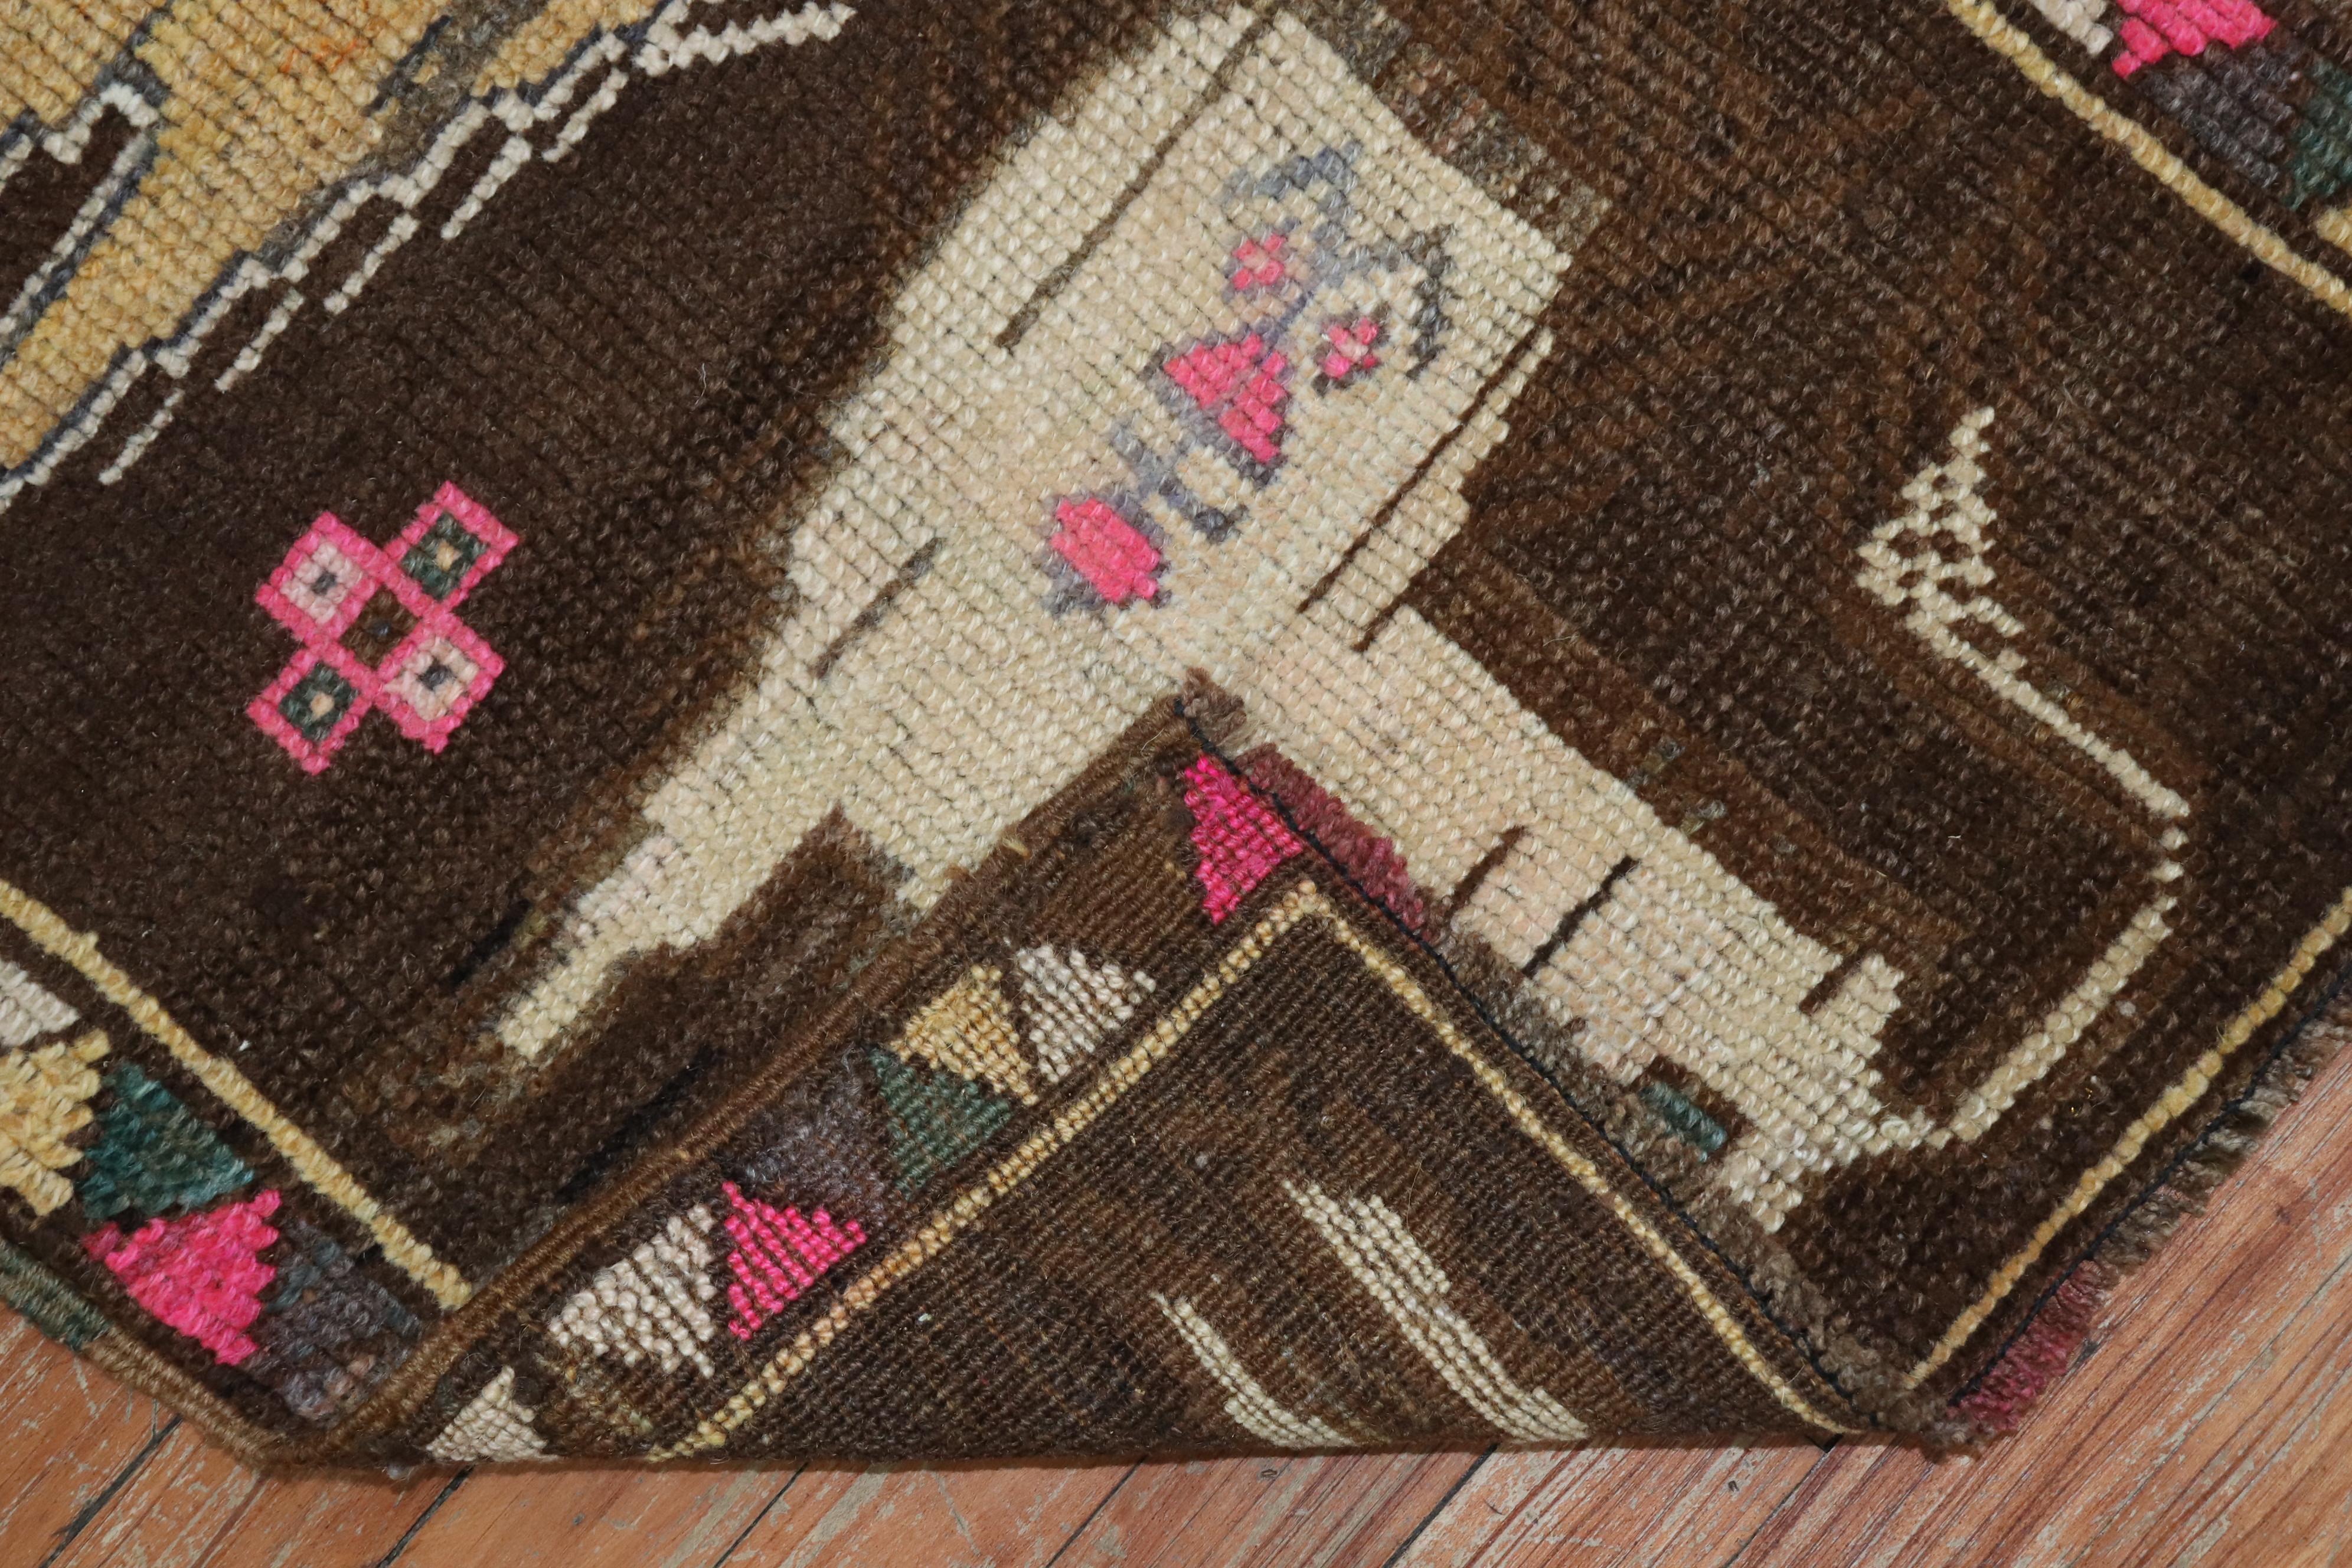 A late 20th century Turkish rug depicting 2 lions on a chocolate brown field.

Measures: 1'10